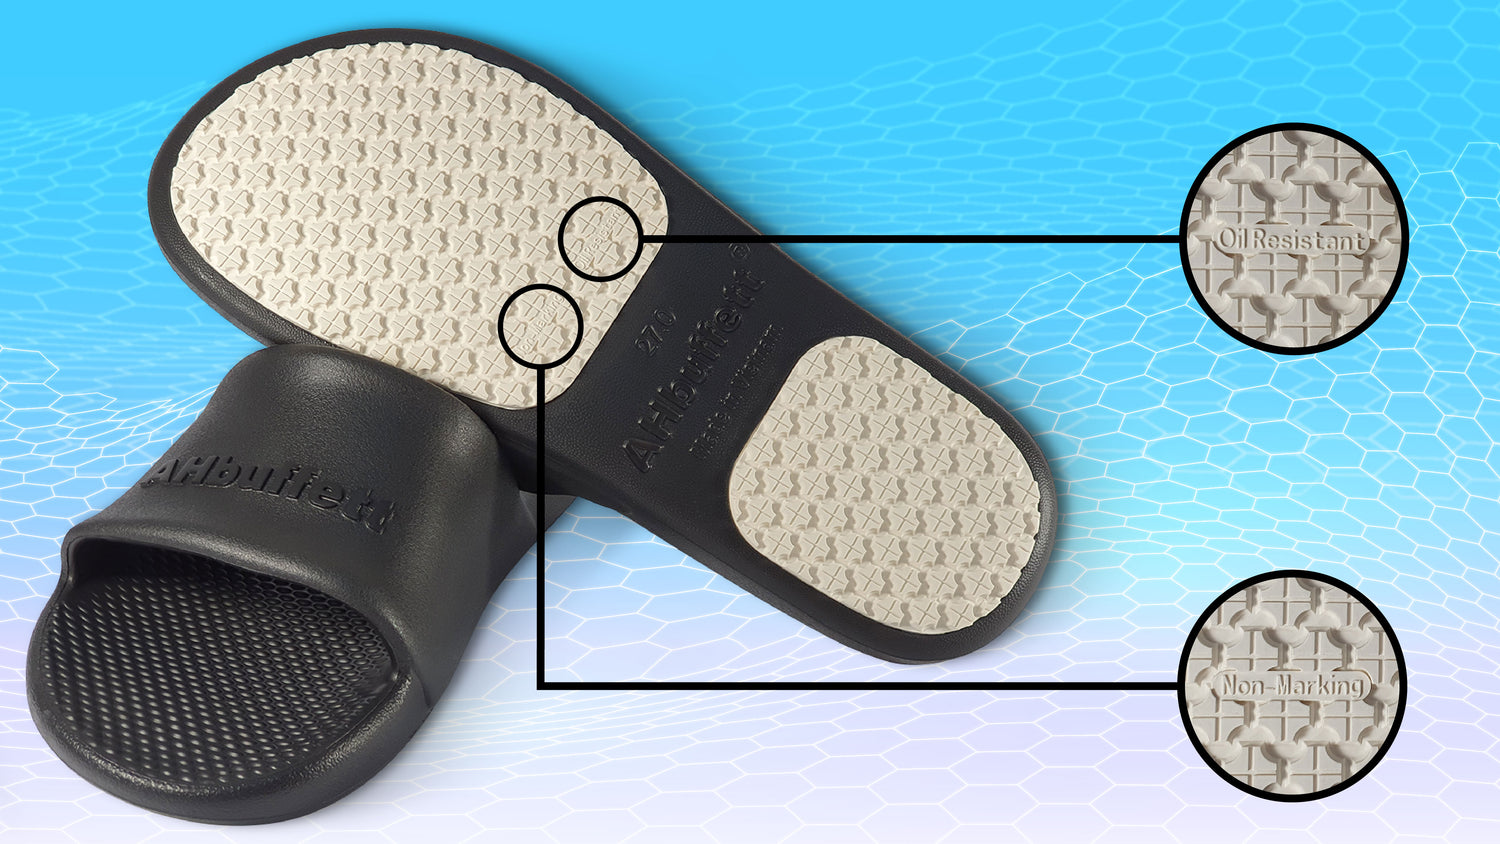 Oil resistant and non-marking sole design.